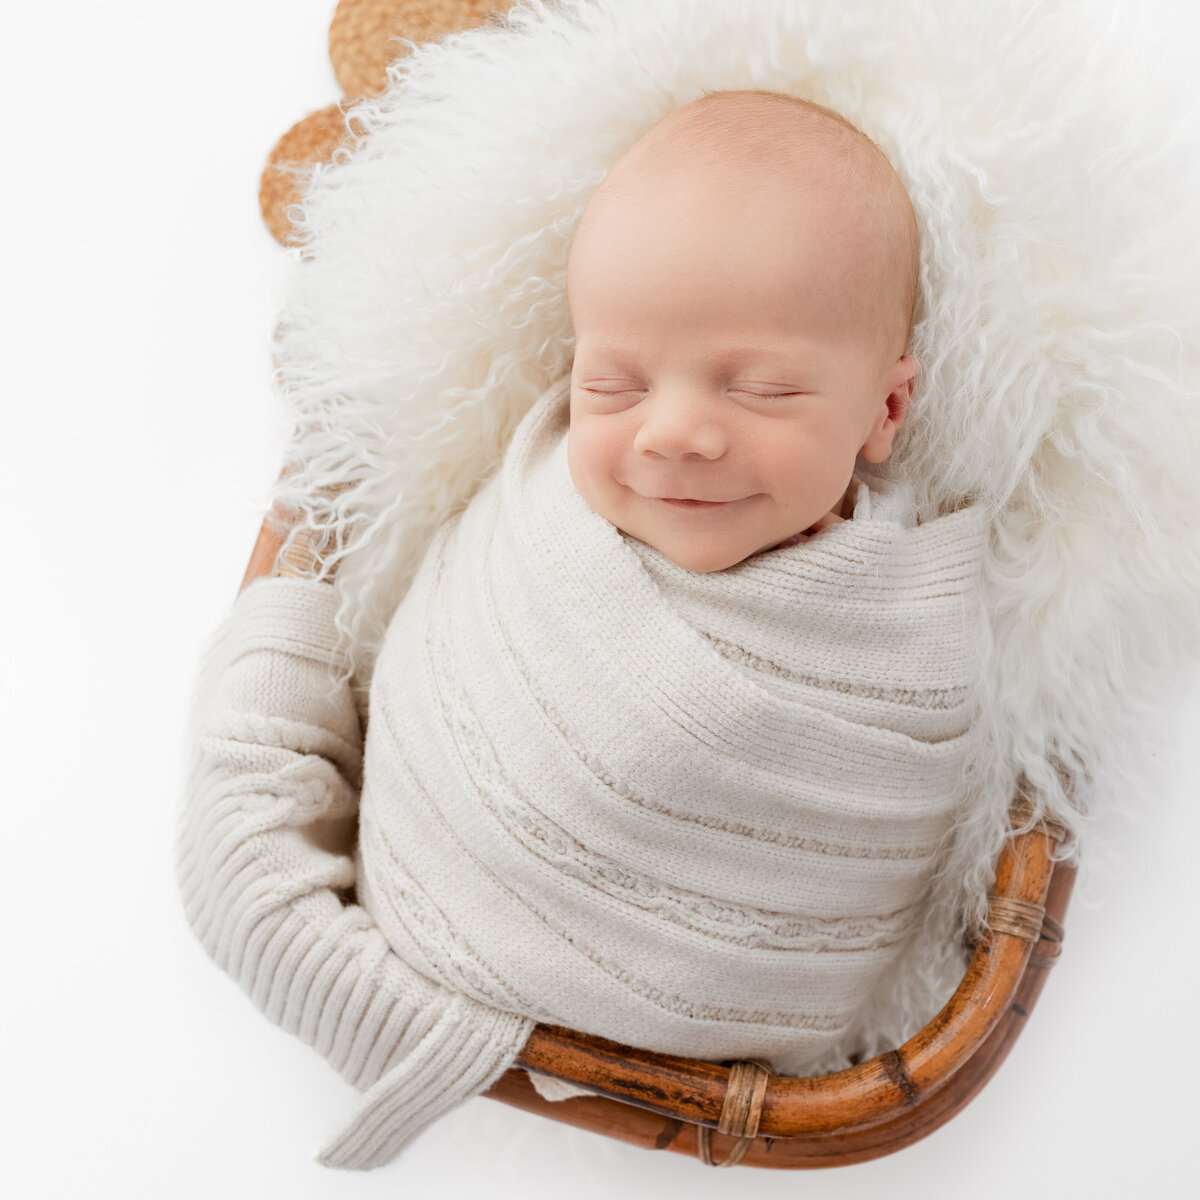 Image is of a baby in a bamboo basket newborn prop.  The baby is resting on an alpaca flokati blanket and is smiling.  Image by Lauren Vanier Photography